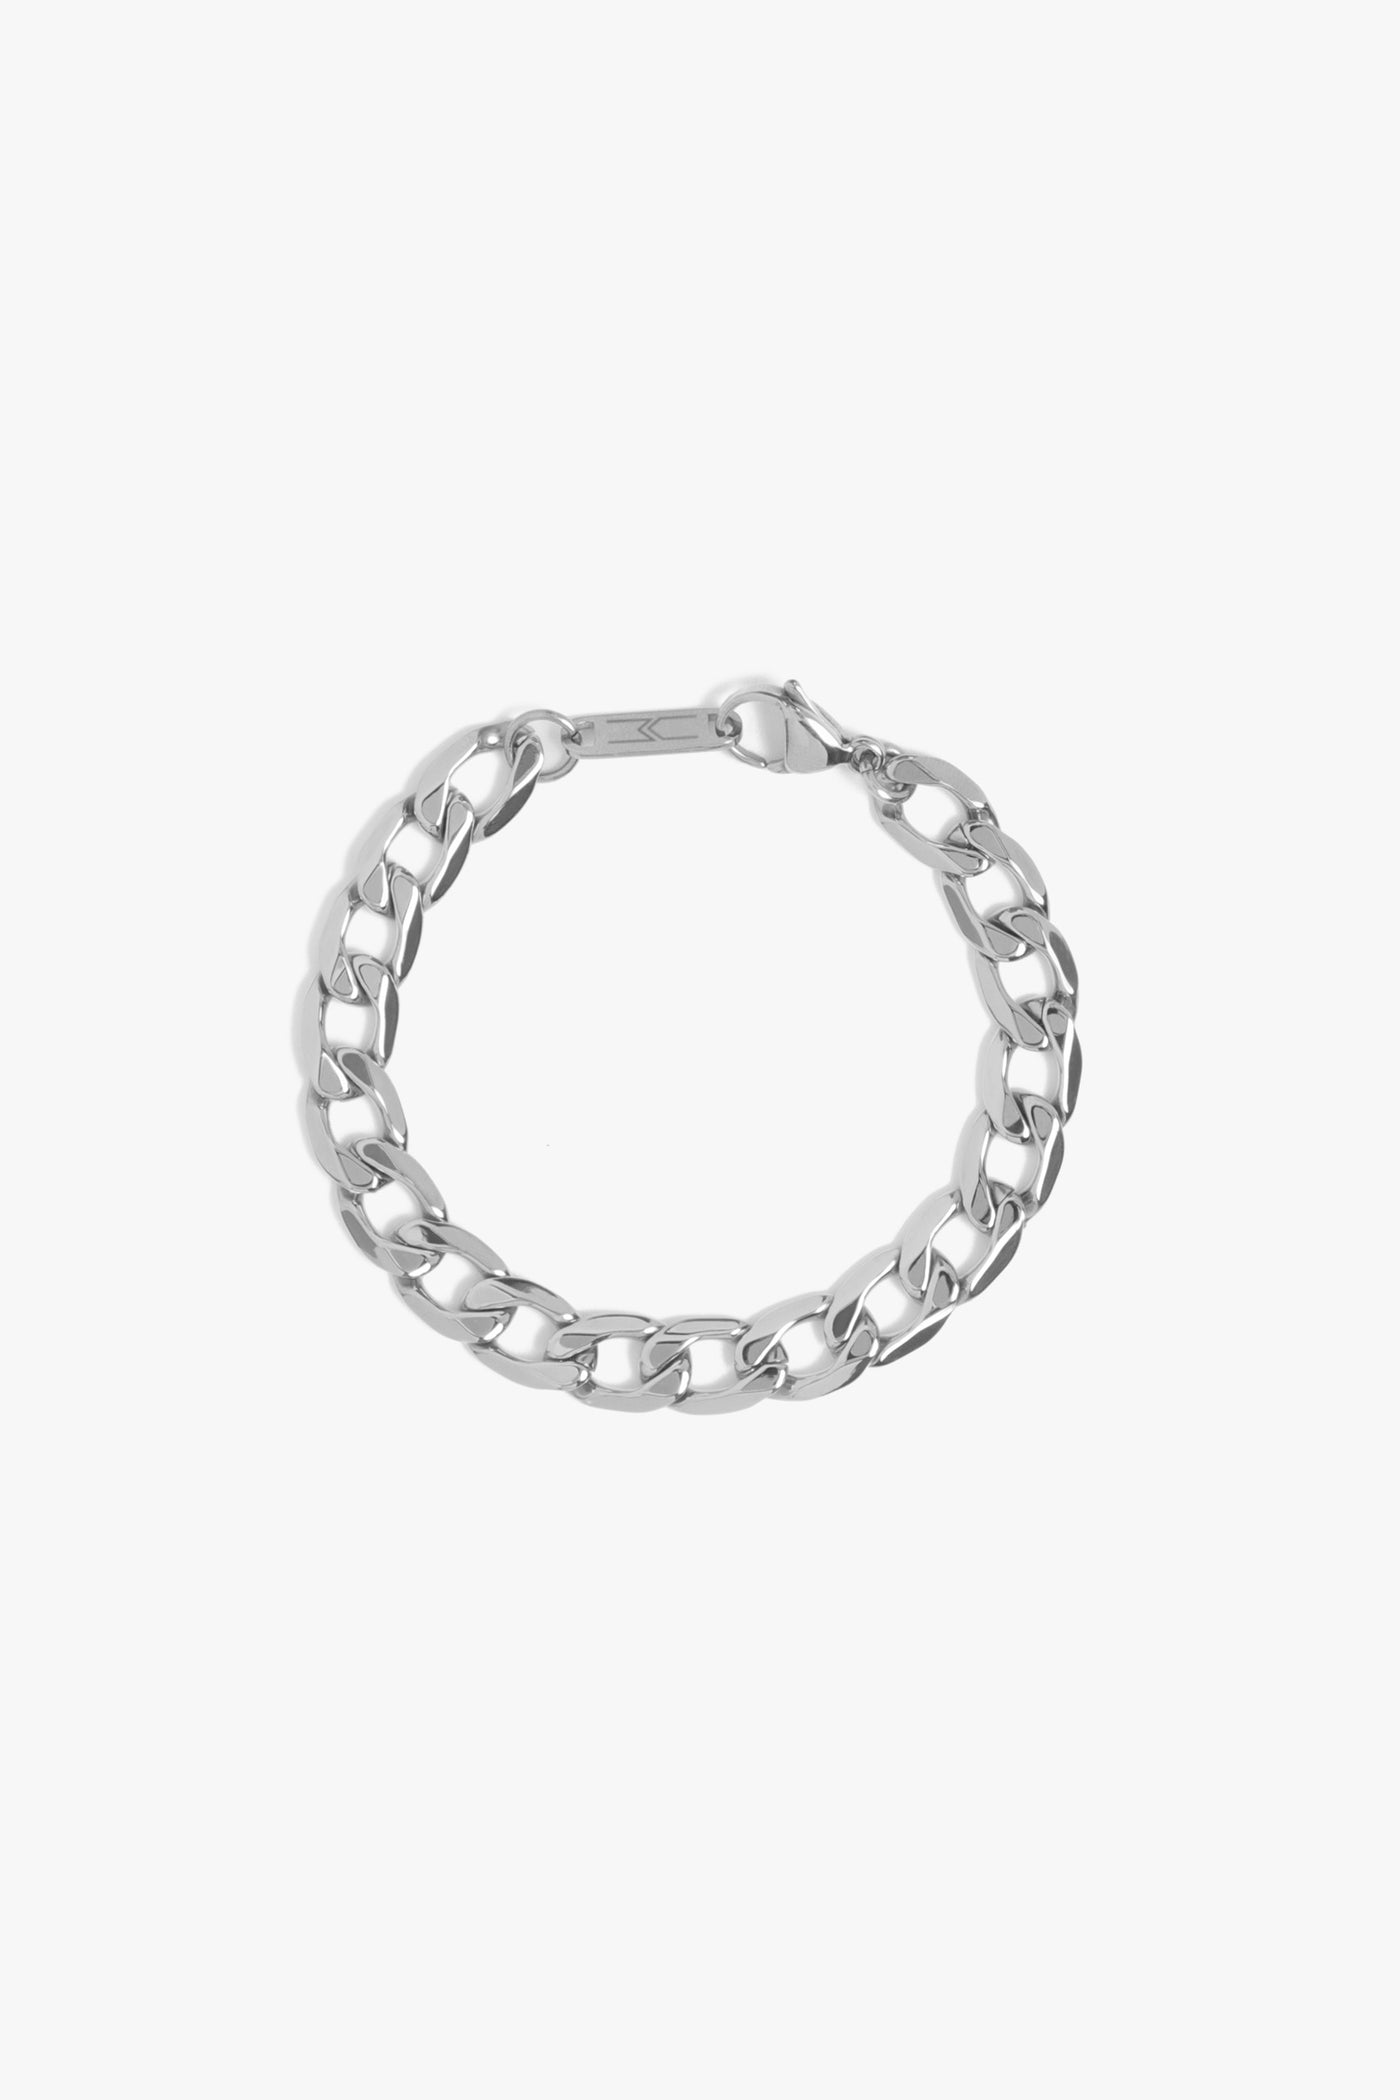 Marrin Costello Jewelry Kings Bracelet flat cuban link chain bracelet with lobster clasp closure. Waterproof, sustainable, hypoallergenic. Polished stainless steel.